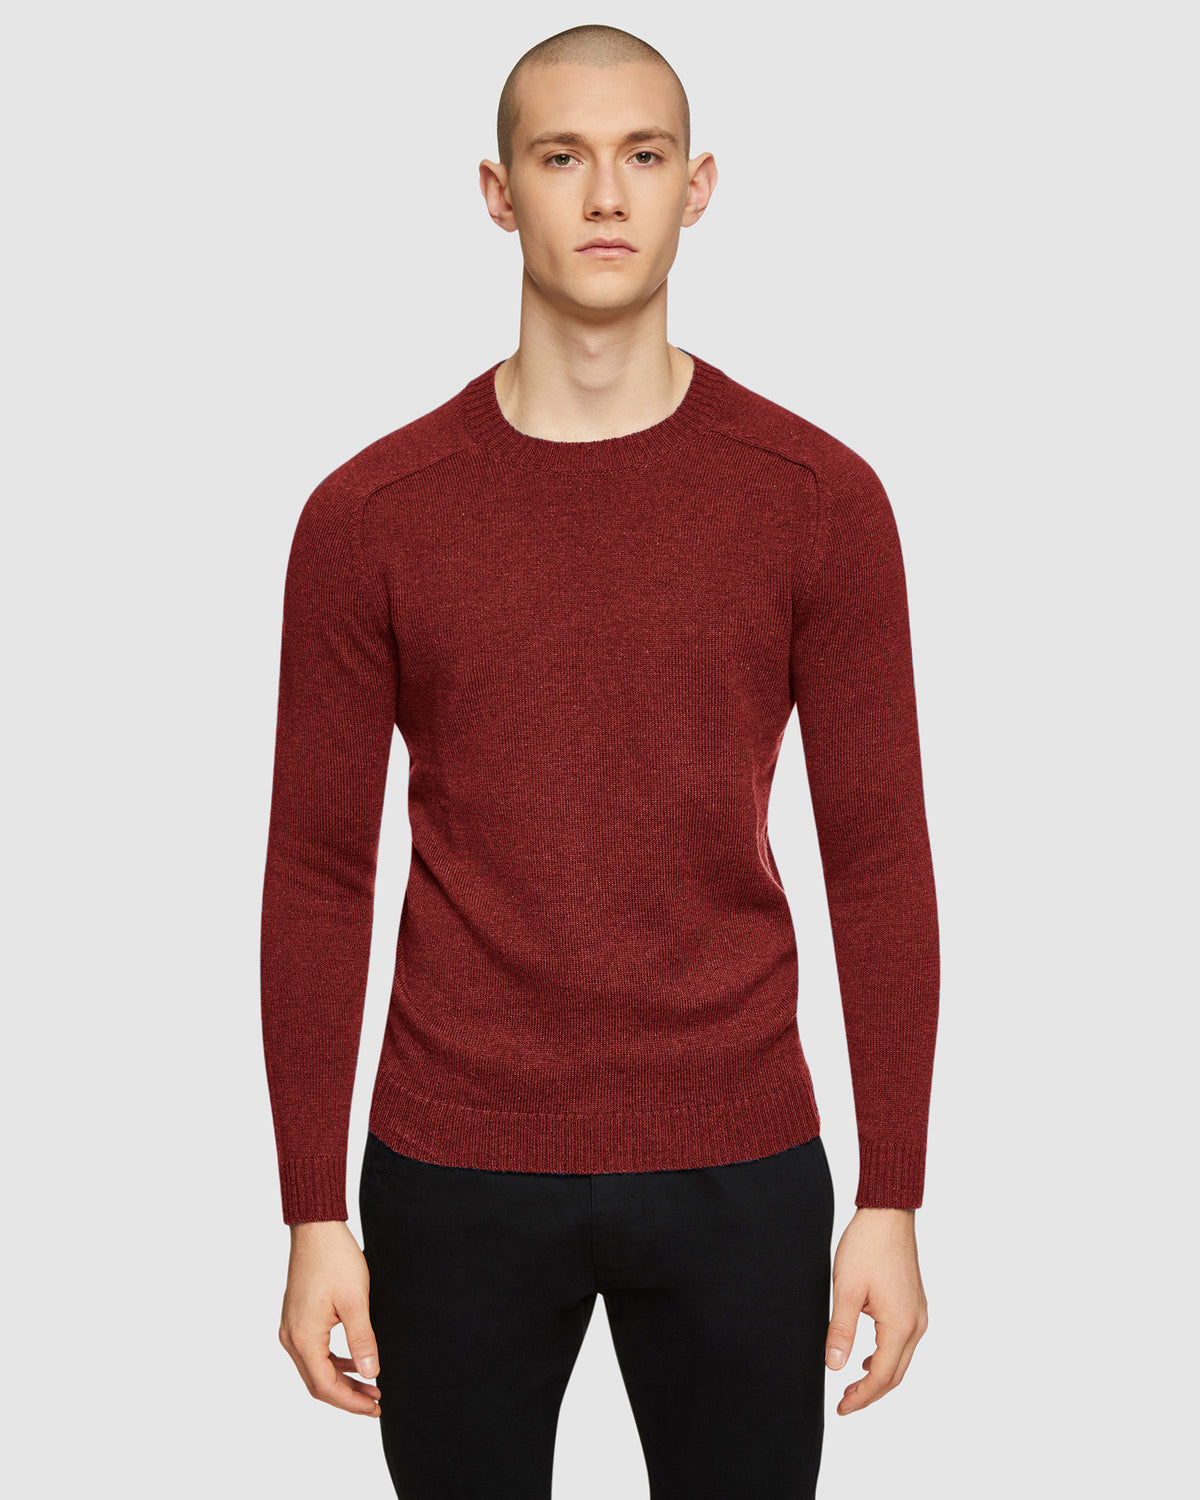 RITCHIE CREW NECK LAMBSWOOL KNIT